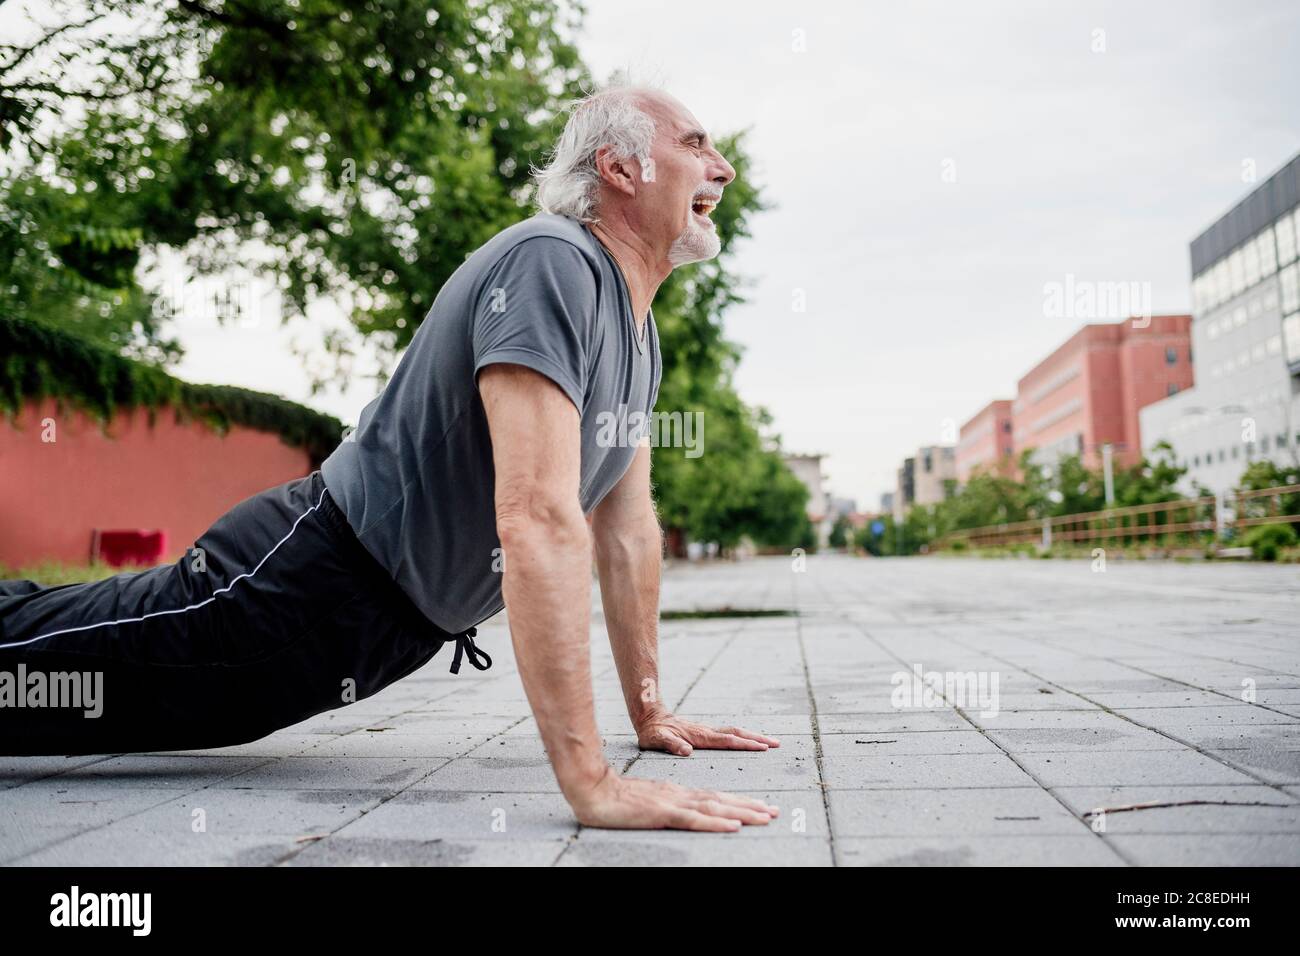 Senior man with mouth open doing push-ups on footpath in city Stock Photo